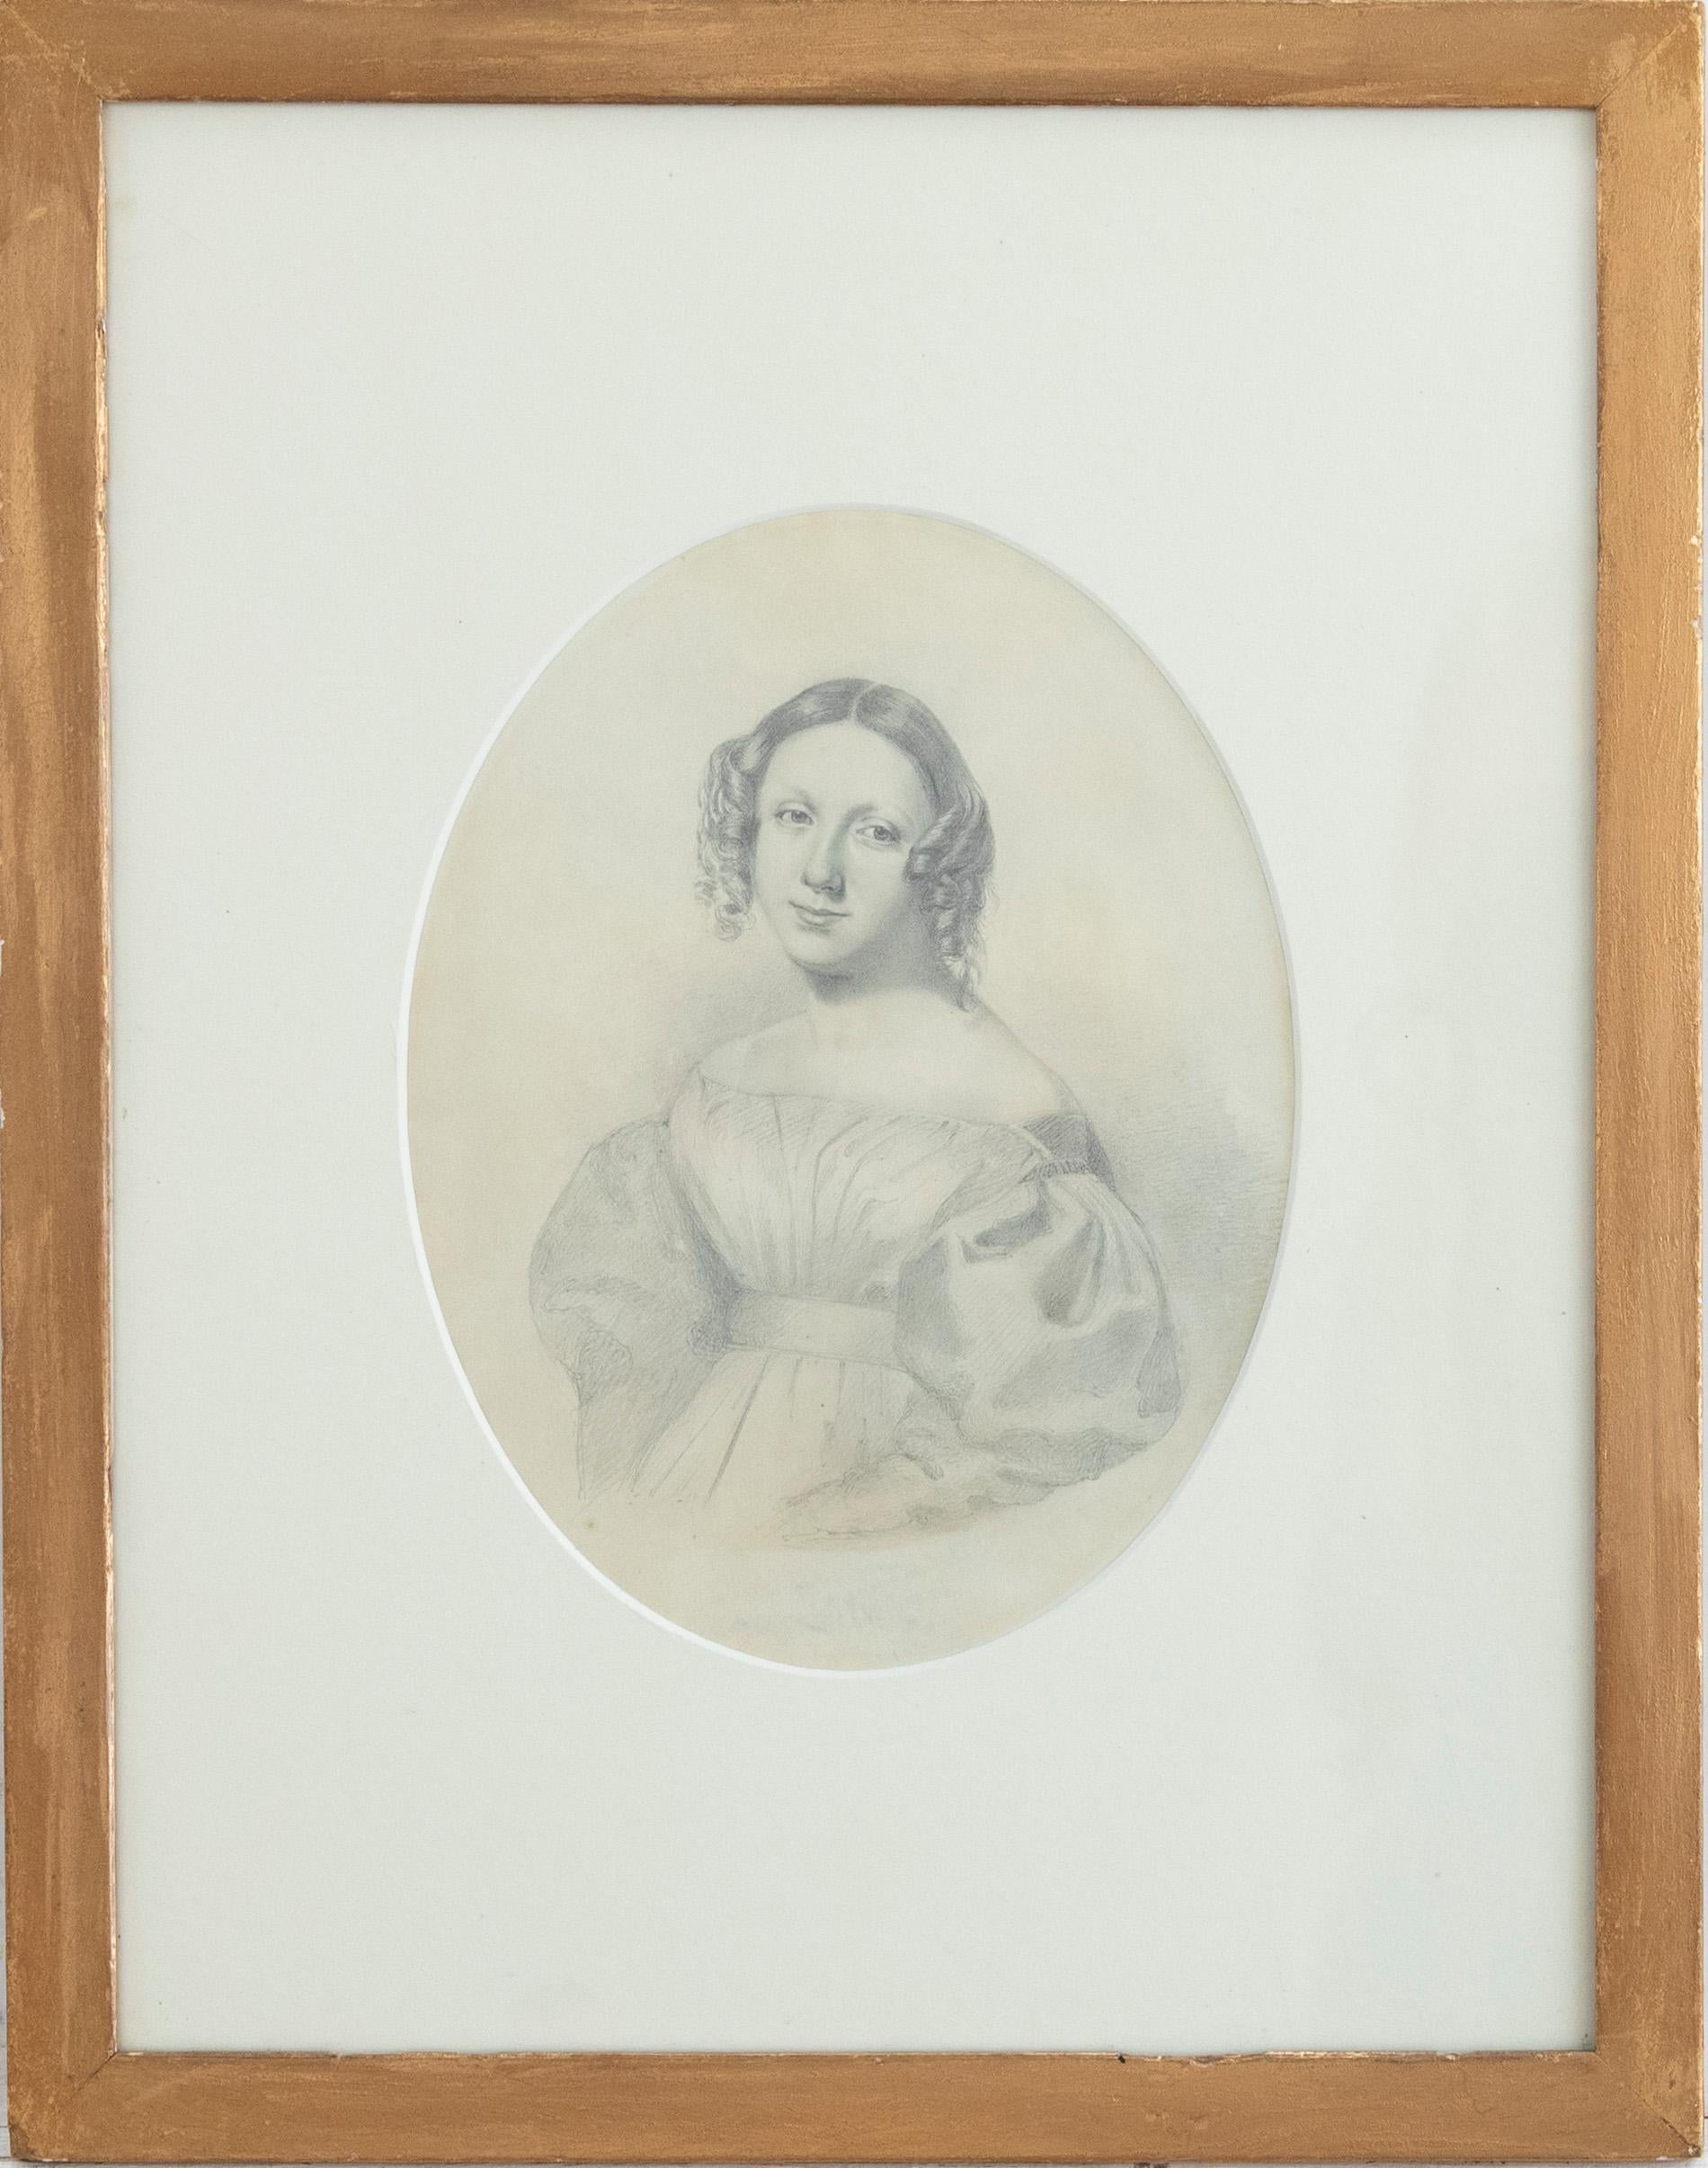 A charming graphite study in the delicate manner. The woman wears a puffed sleeved and ringlets fall to the side of her face in a typical Victorian fashion. Unsigned. Presented in a gilt frame. On paper.